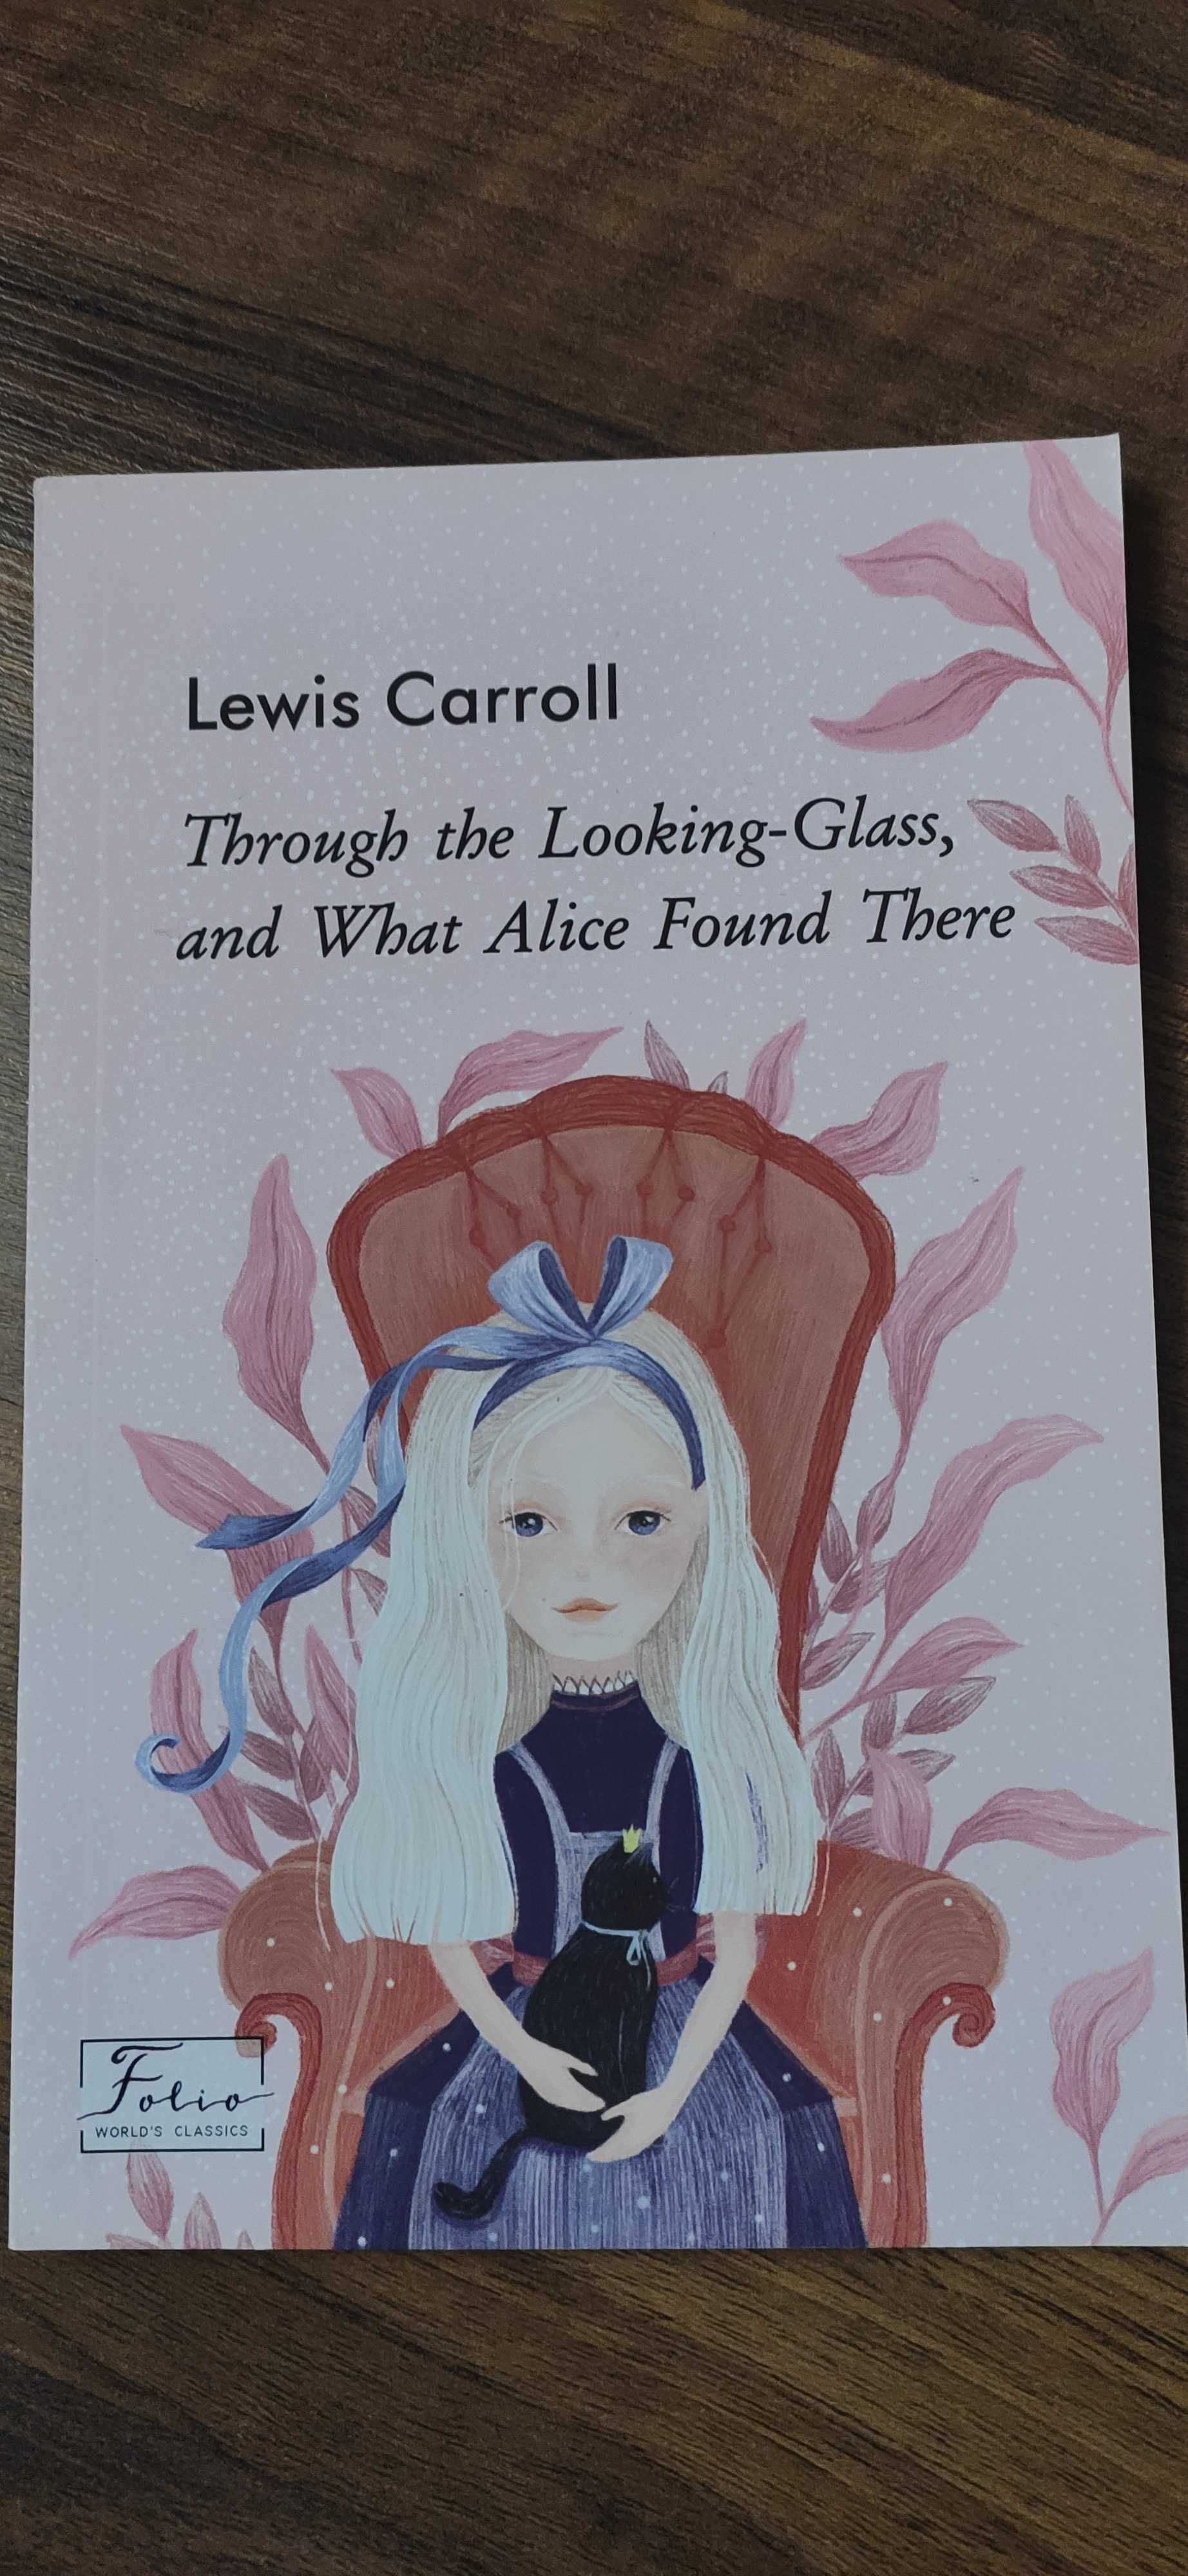 Lewis Carroll "Through the Looking-glass"